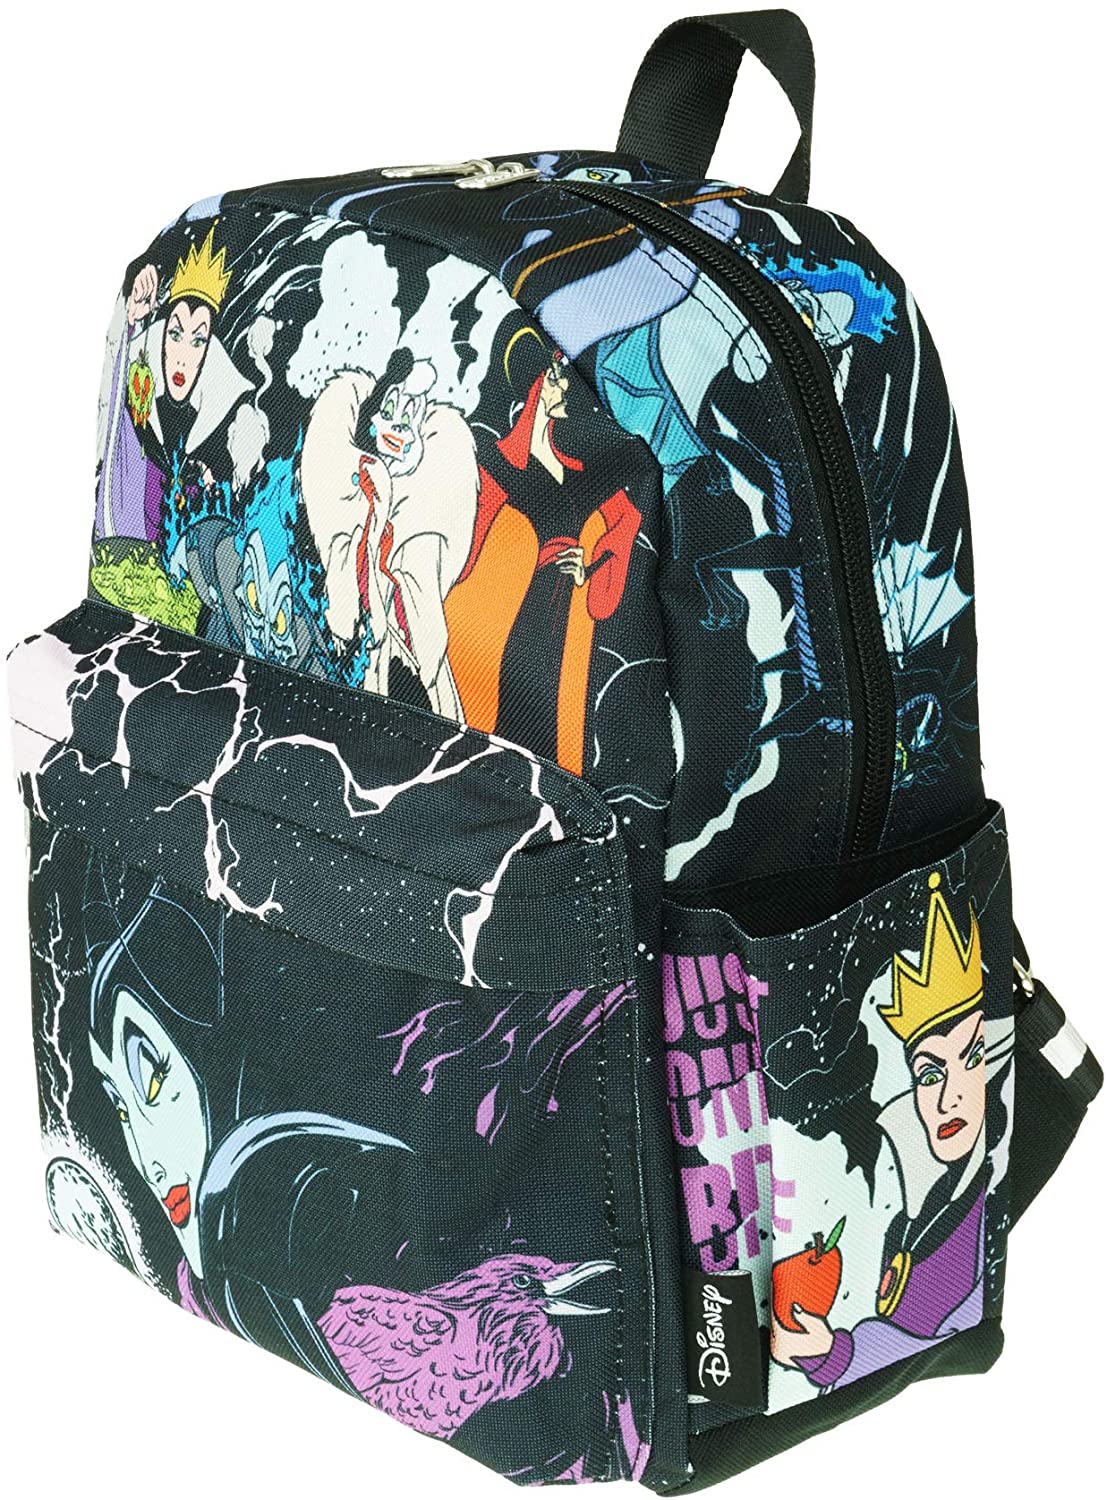 Villains 12" Deluxe Oversize Print Daypack - A21274 - GTE Zone